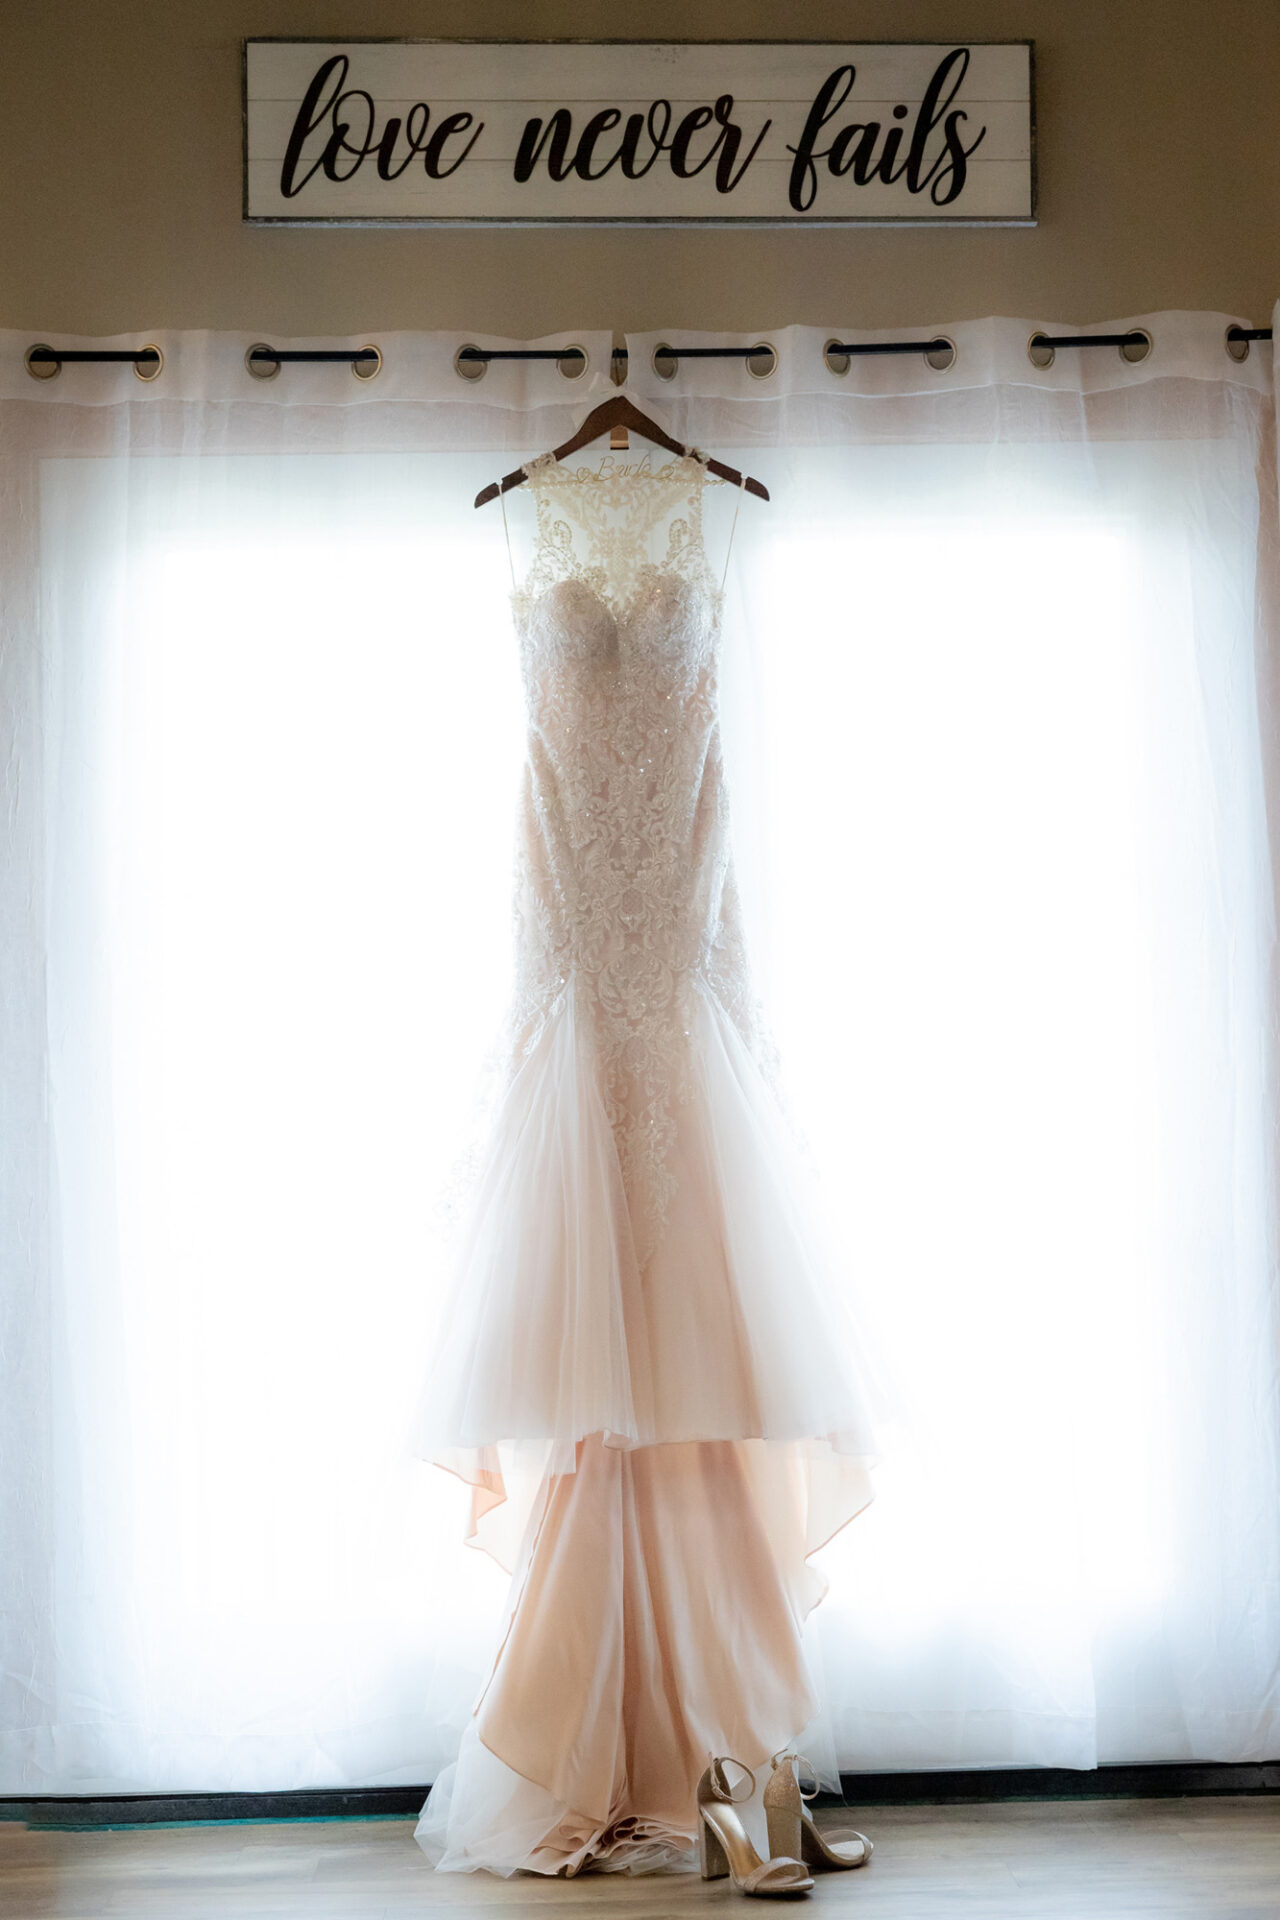 Cream-colored beaded wedding dress hung on a hanger placed against a curtain